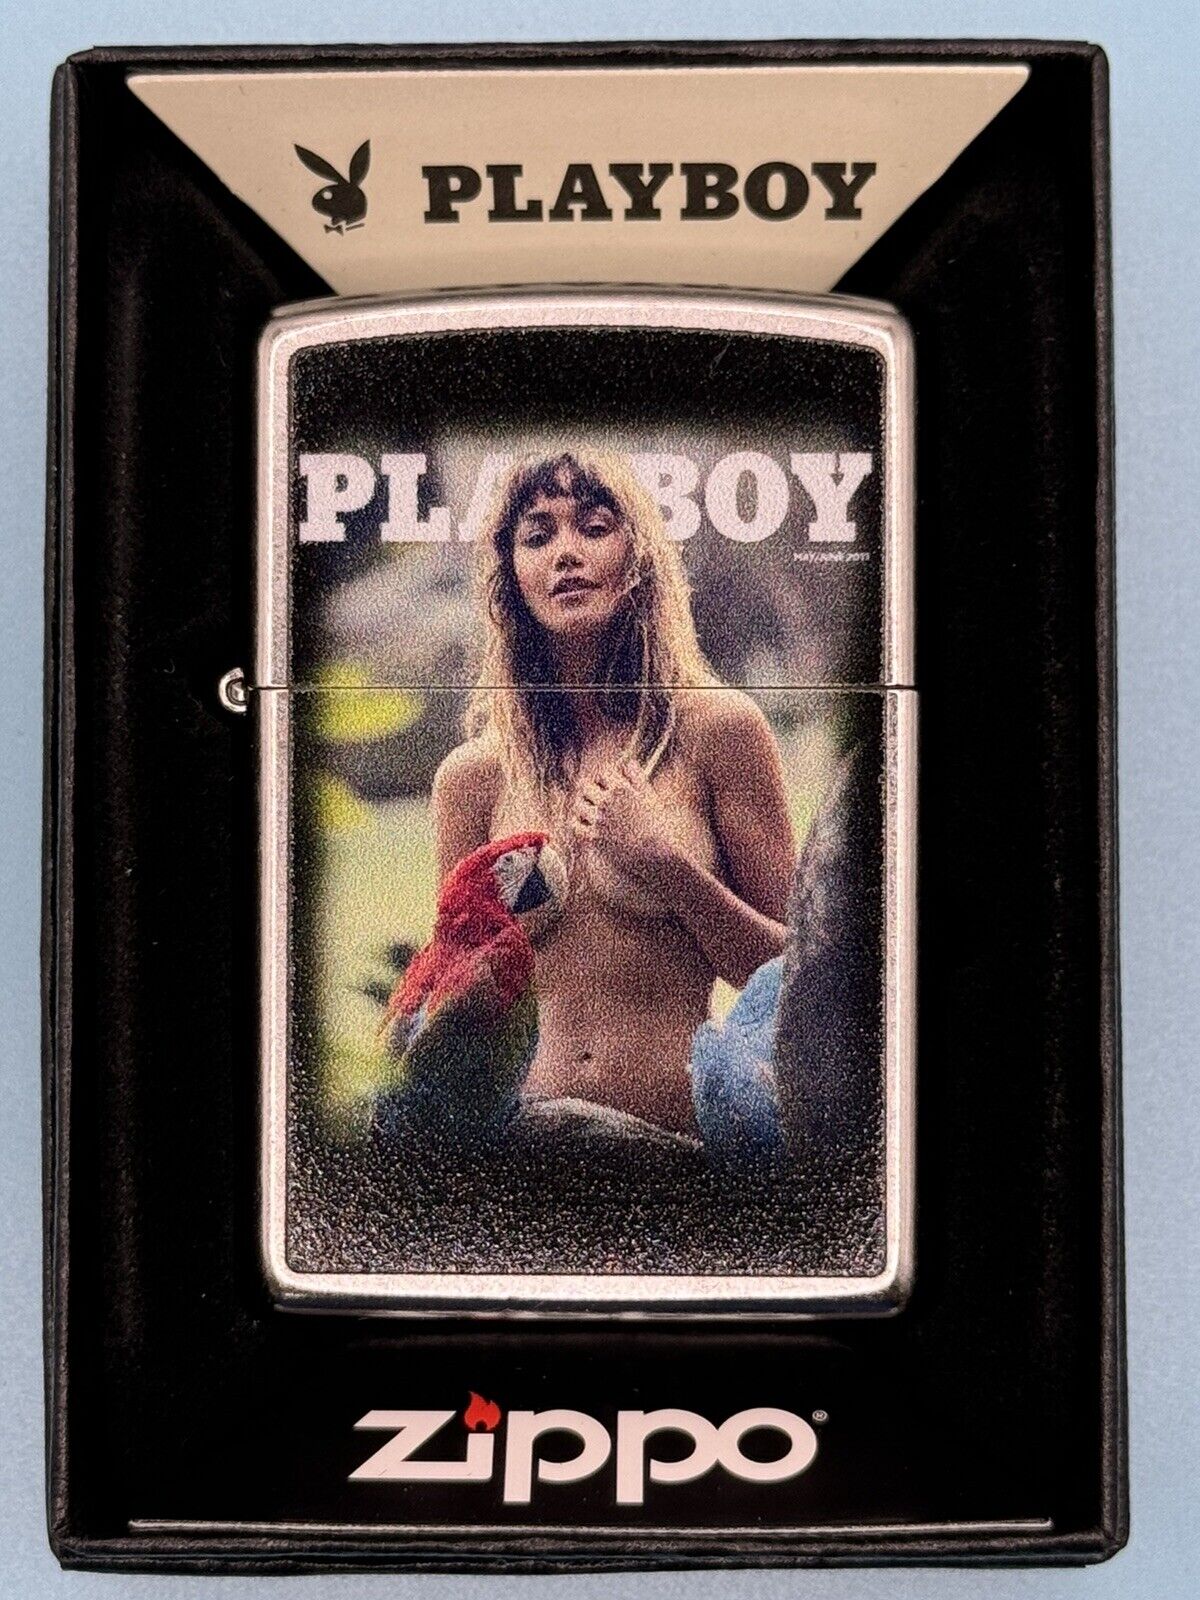 May June 2017 Playboy Magazine Cover Zippo Lighter NEW In Box Rare Pinup